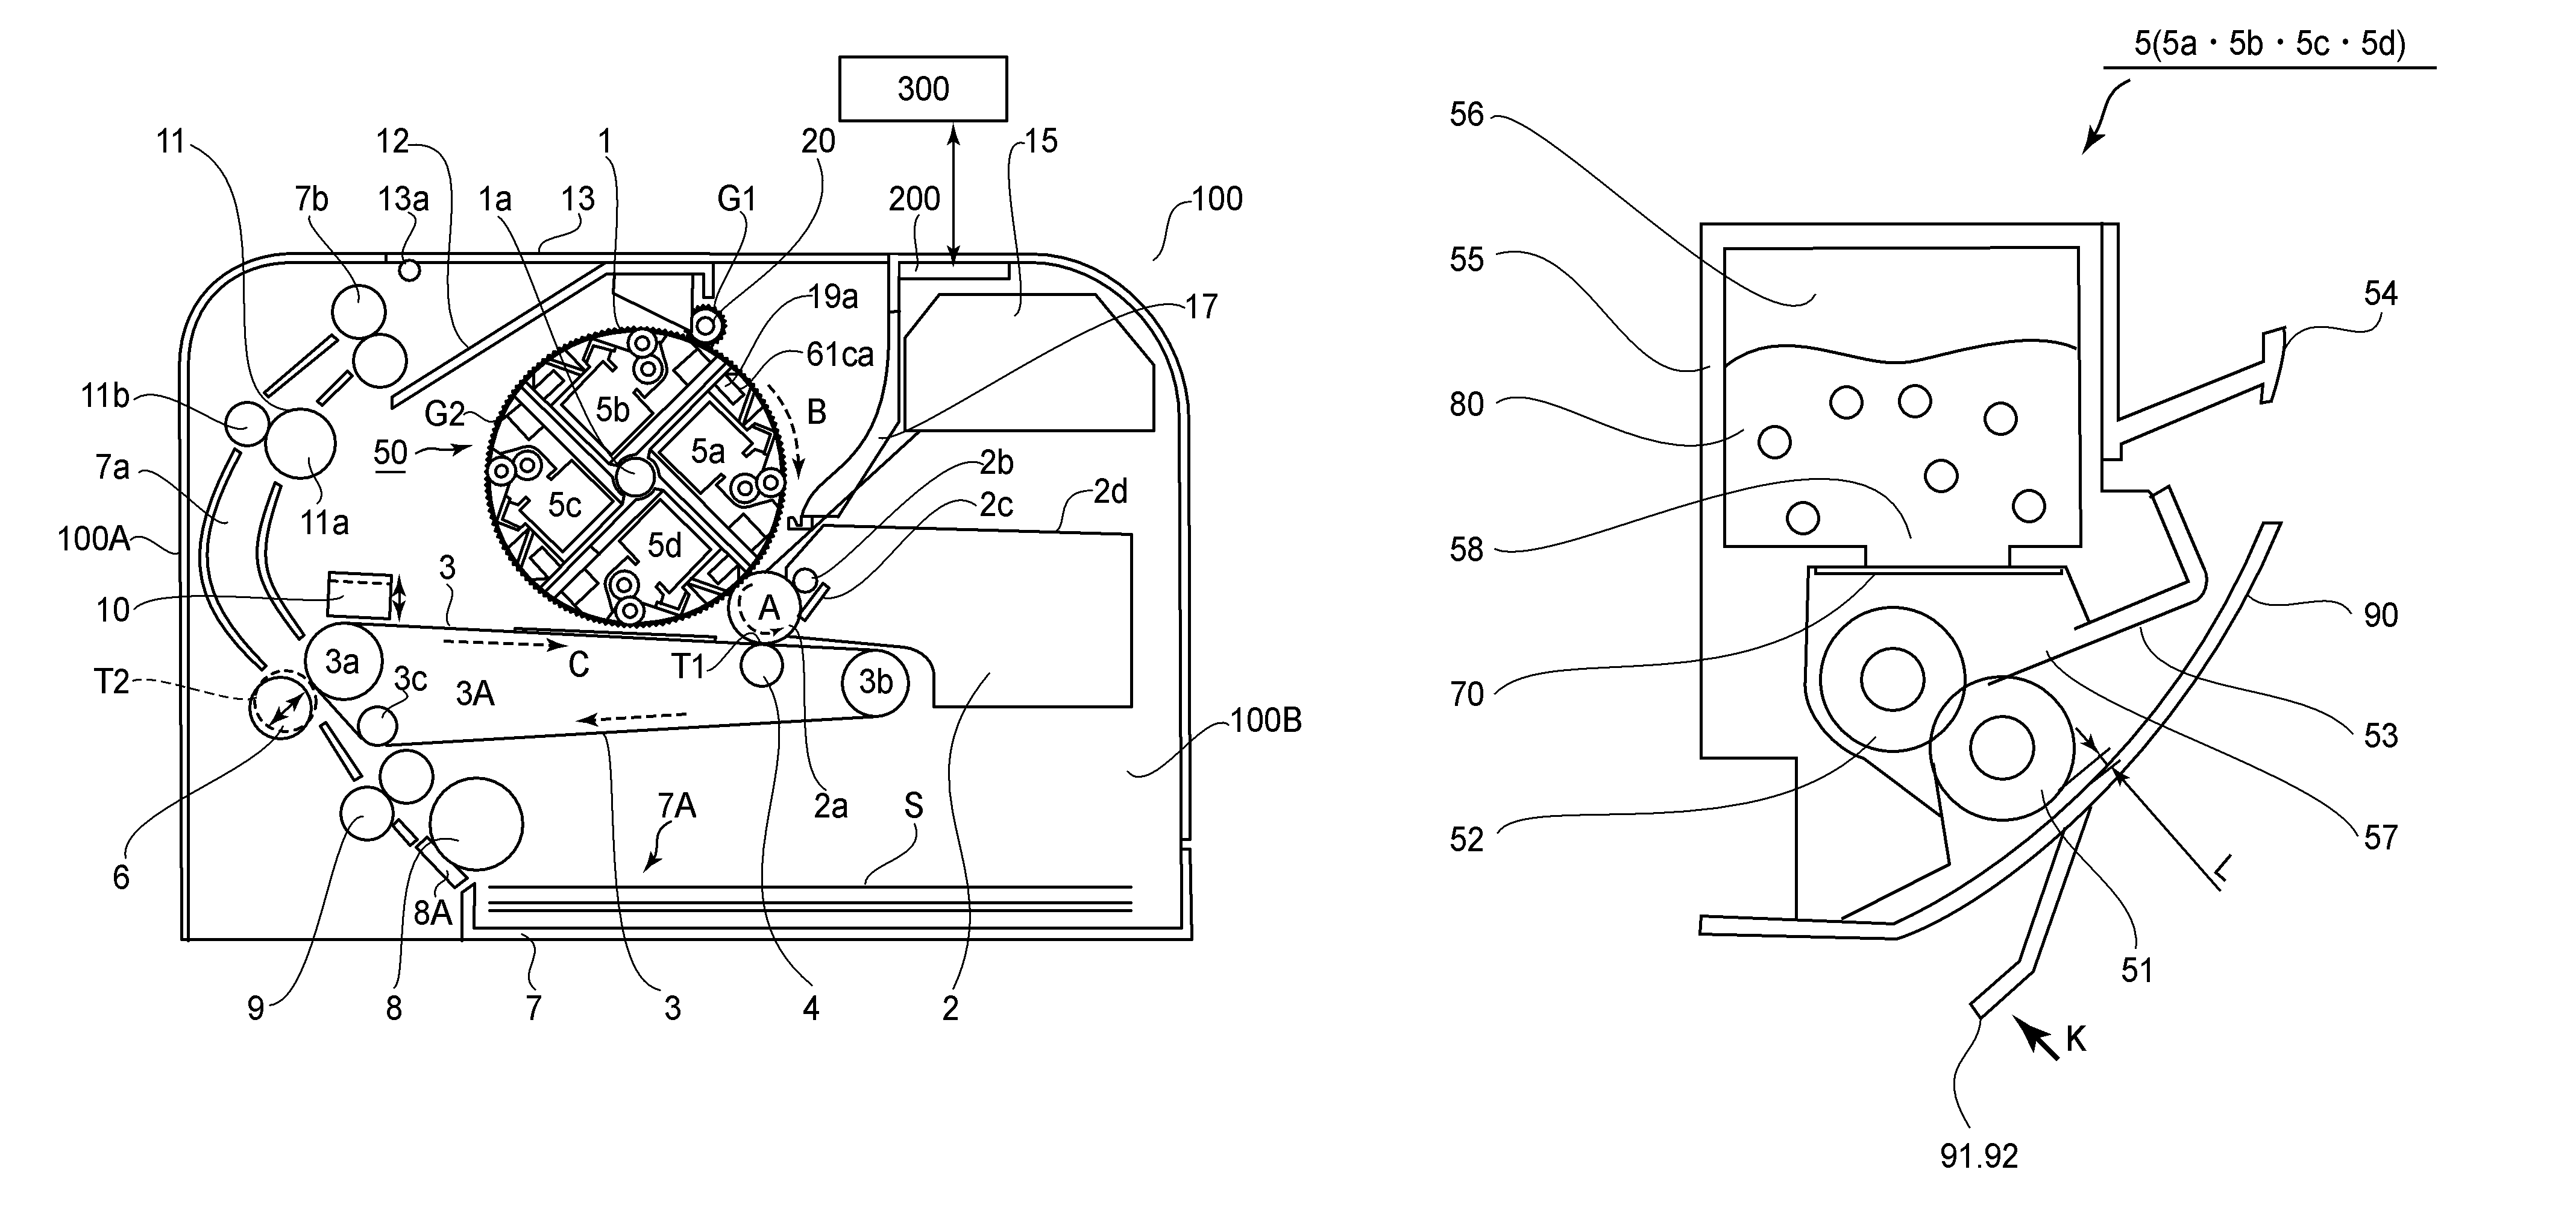 Image forming apparatus with developing cartridge having engaging portion